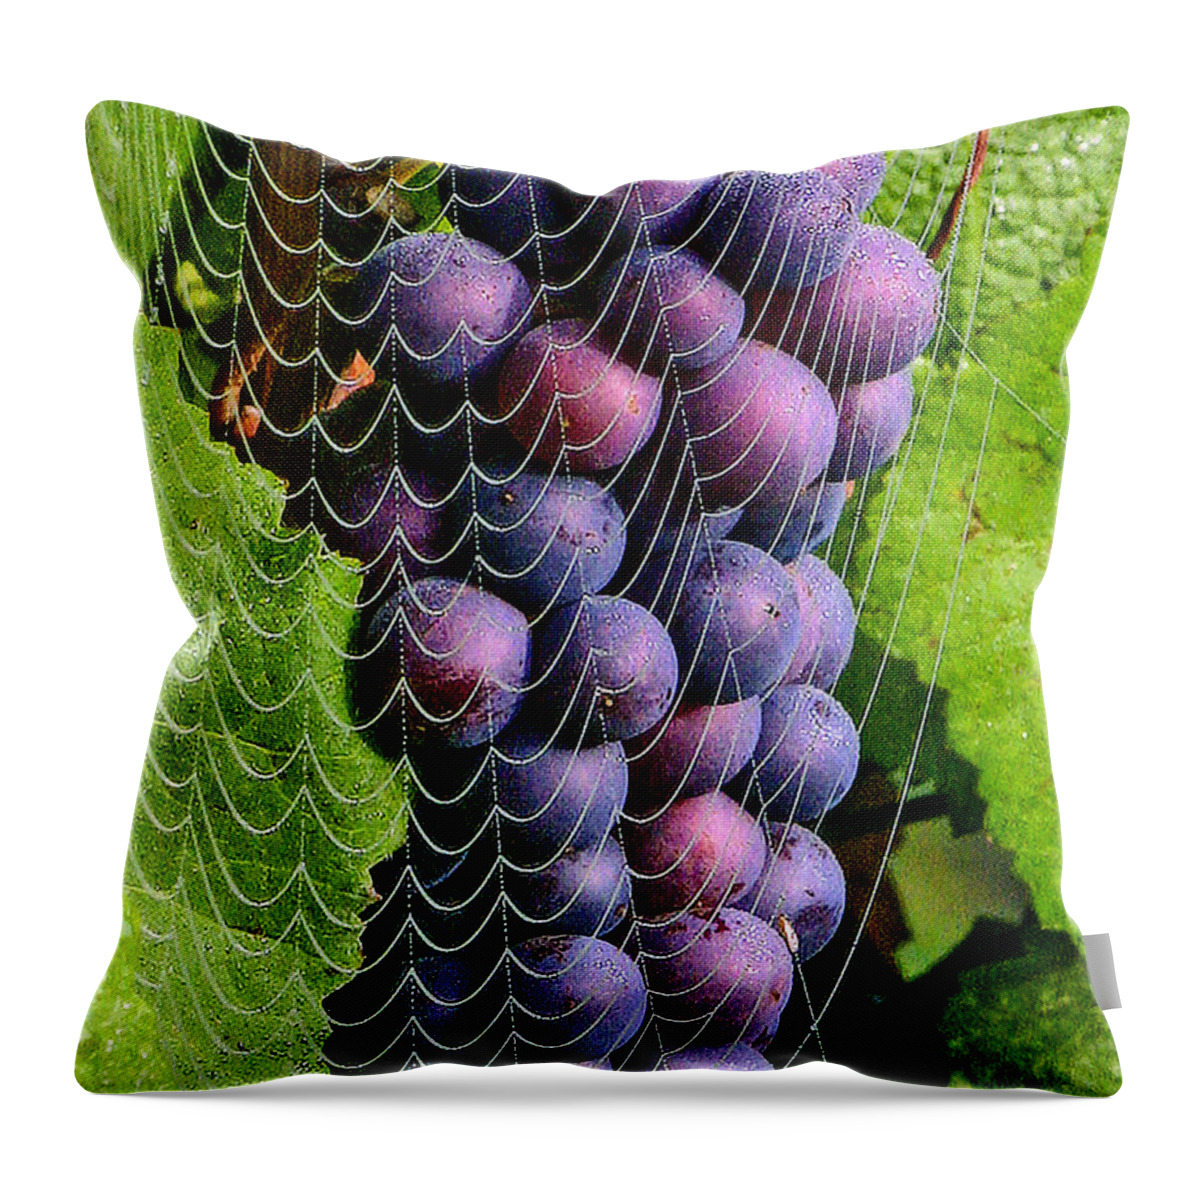 Wine In A Web Throw Pillow featuring the photograph Wine in a web 2 by Jean Noren